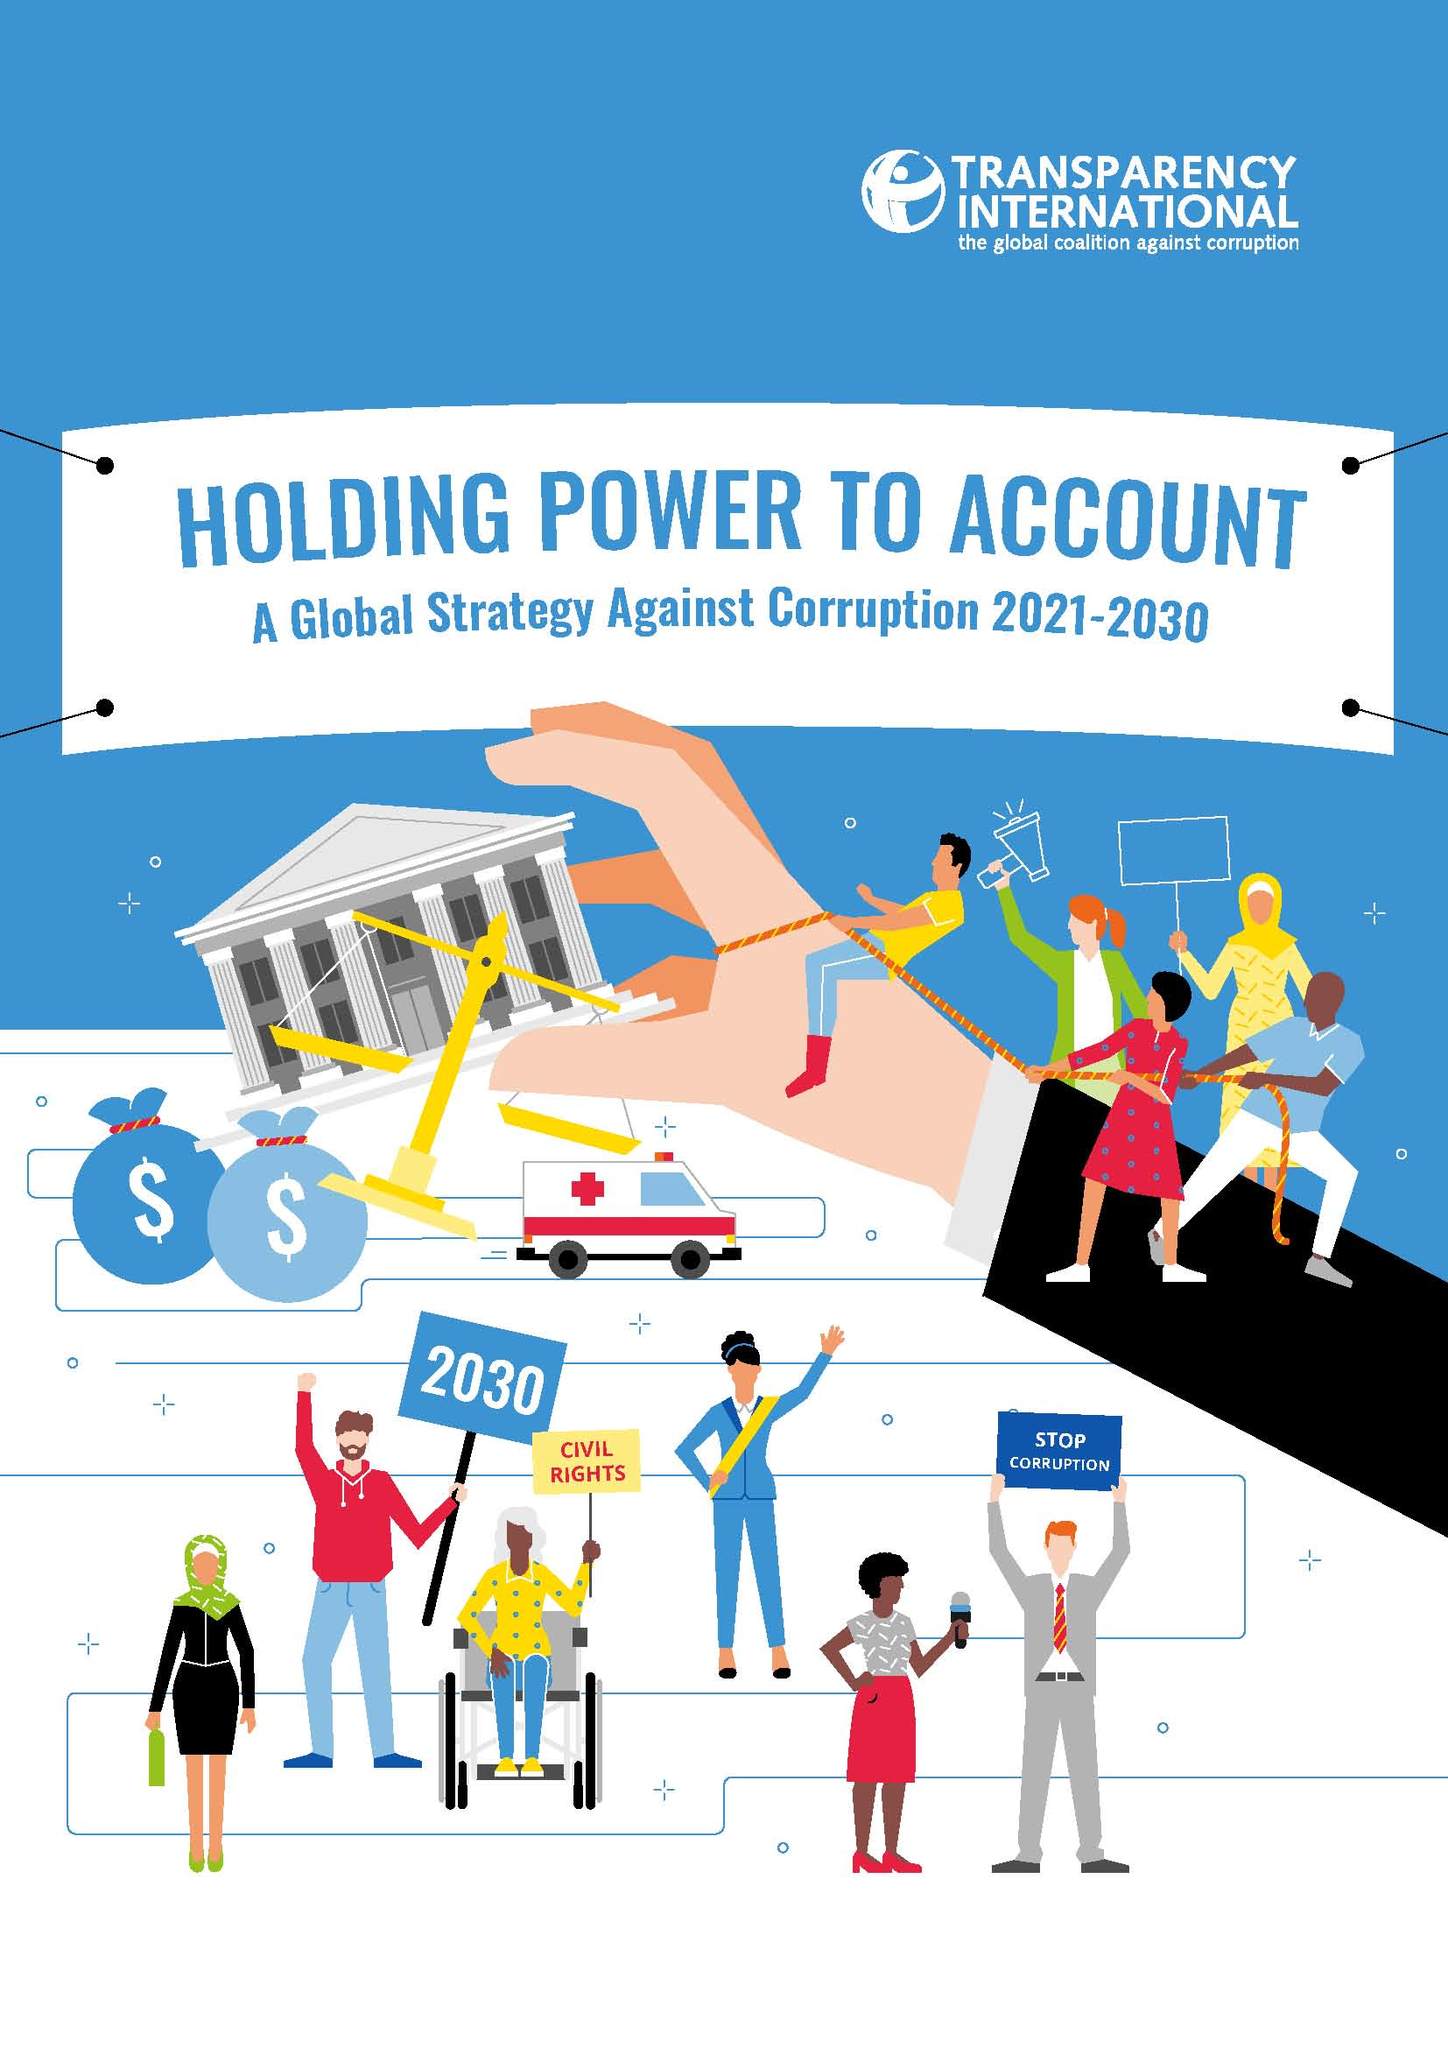 Holding power to account /A global strategy against Corruption 2021-2030/